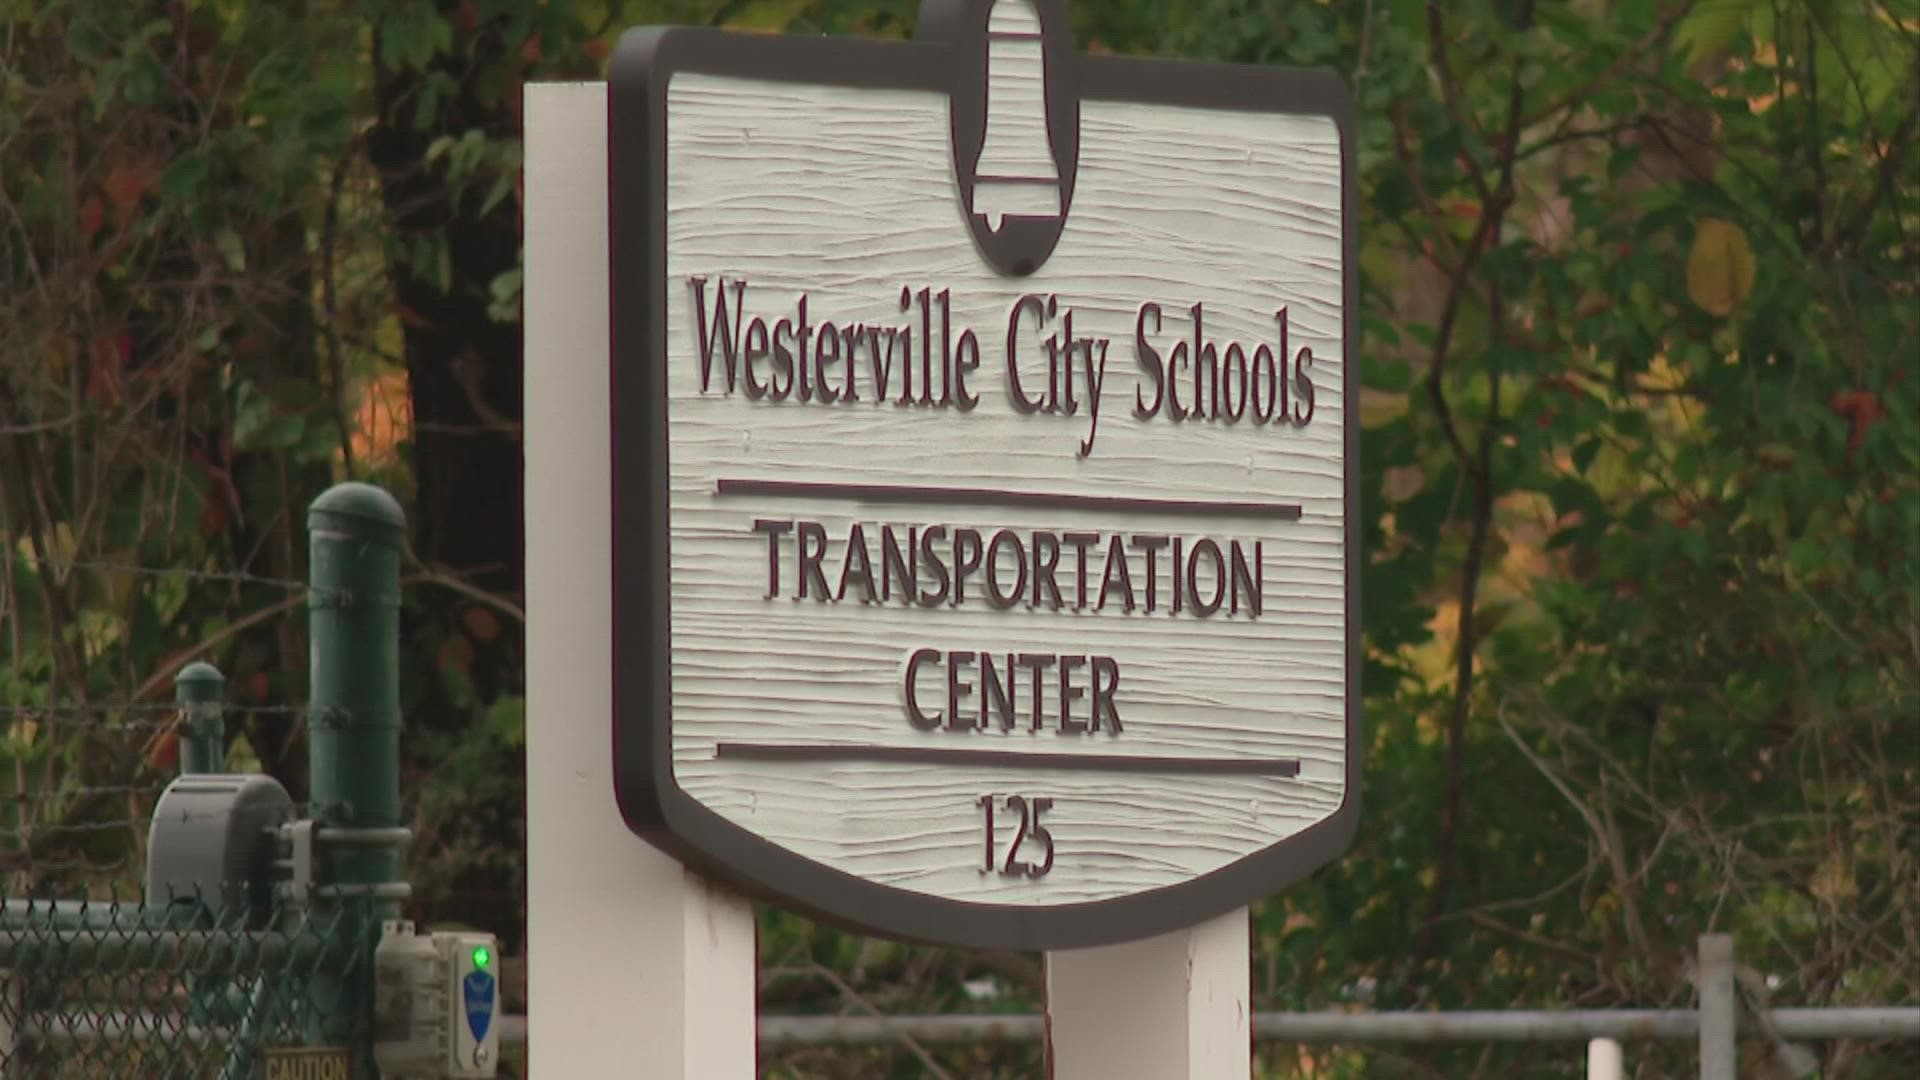 The schedule changes are due to a high number of transportation absences, according to a district spokesperson.